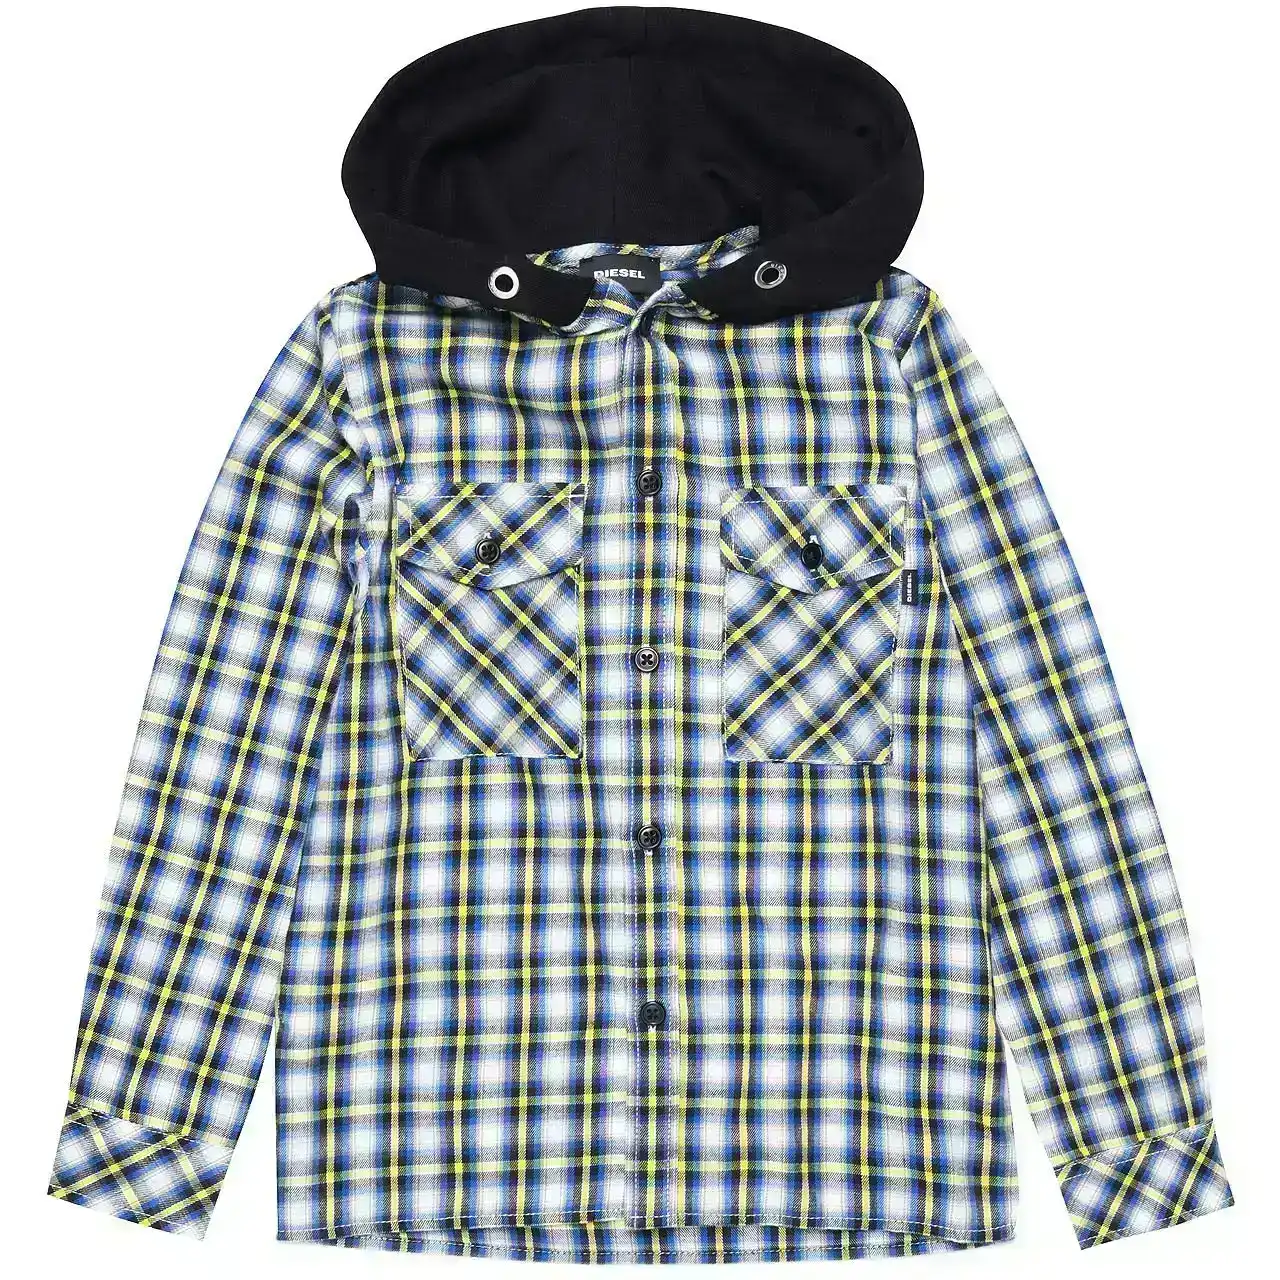 Diesel Boys Check Button Up Shirt with Hood